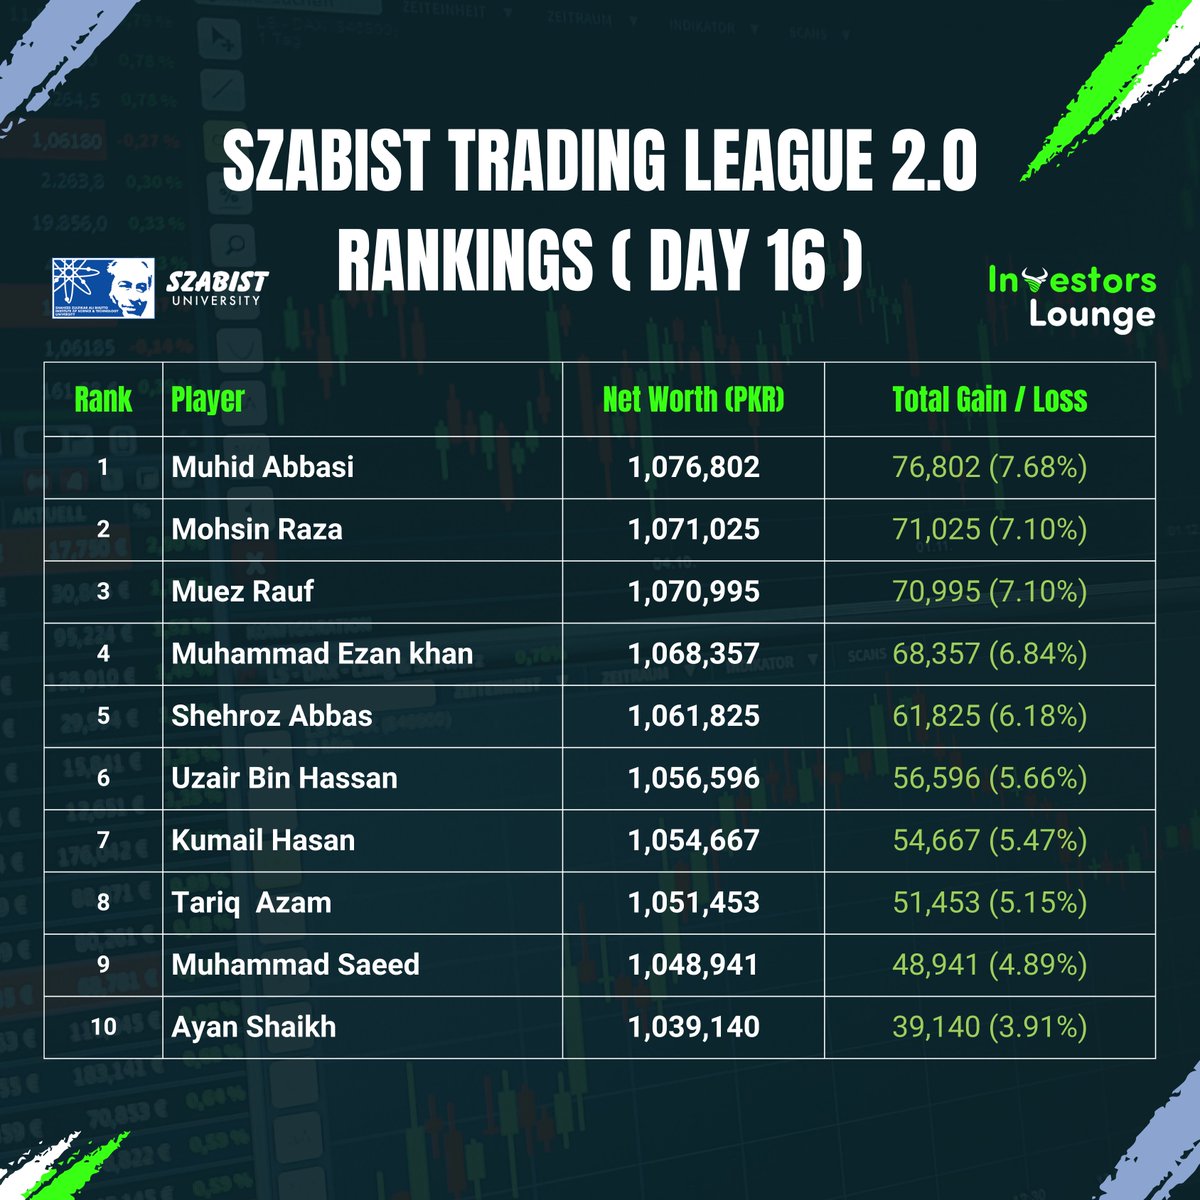 SZABIST Trading League 2.0 - Top 10 Rankings Day 16  

Muhid Abbasi is at the top of the leaderboard, with a net worth of 1,076,802 PKR and a total increase of 7.68%
#KSE100 #tradingchamps #Investorslounge #tradingleague #SZABIST #PSX